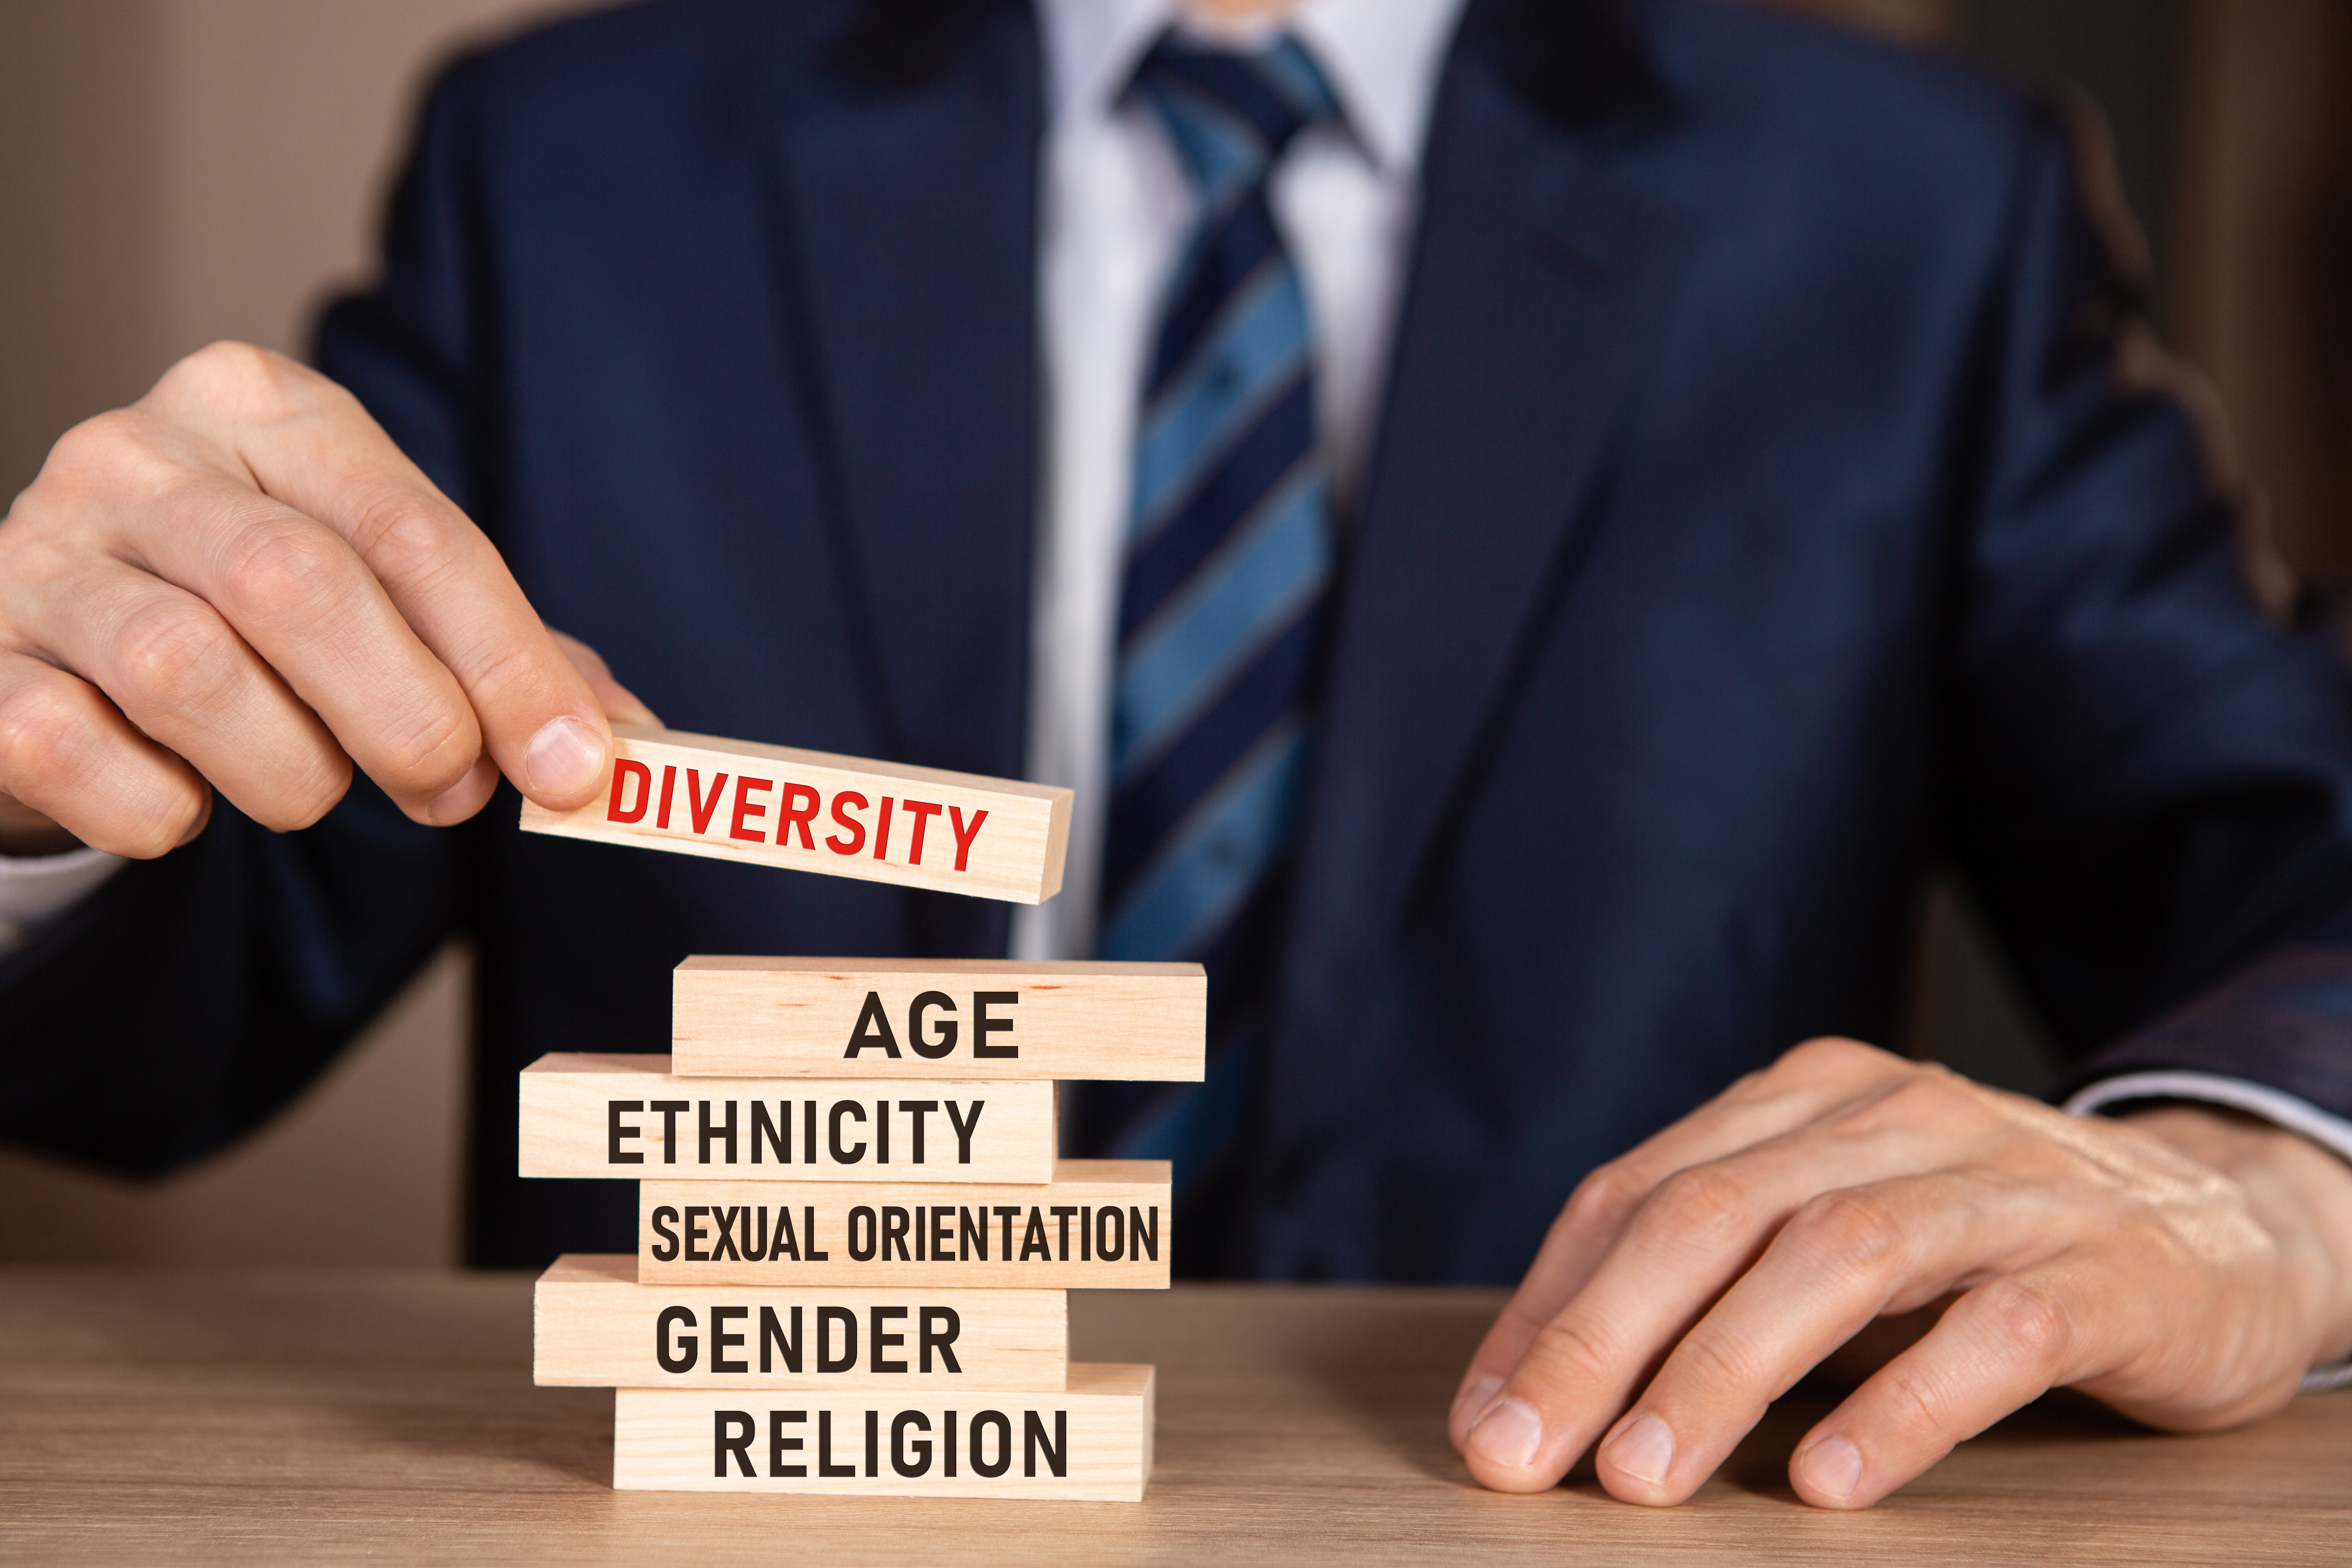 Diversity concept. Business man building stack from wooden blocks with text Diversity, Age, Ethnicity, Sexual Orientation, Gender, Religion.